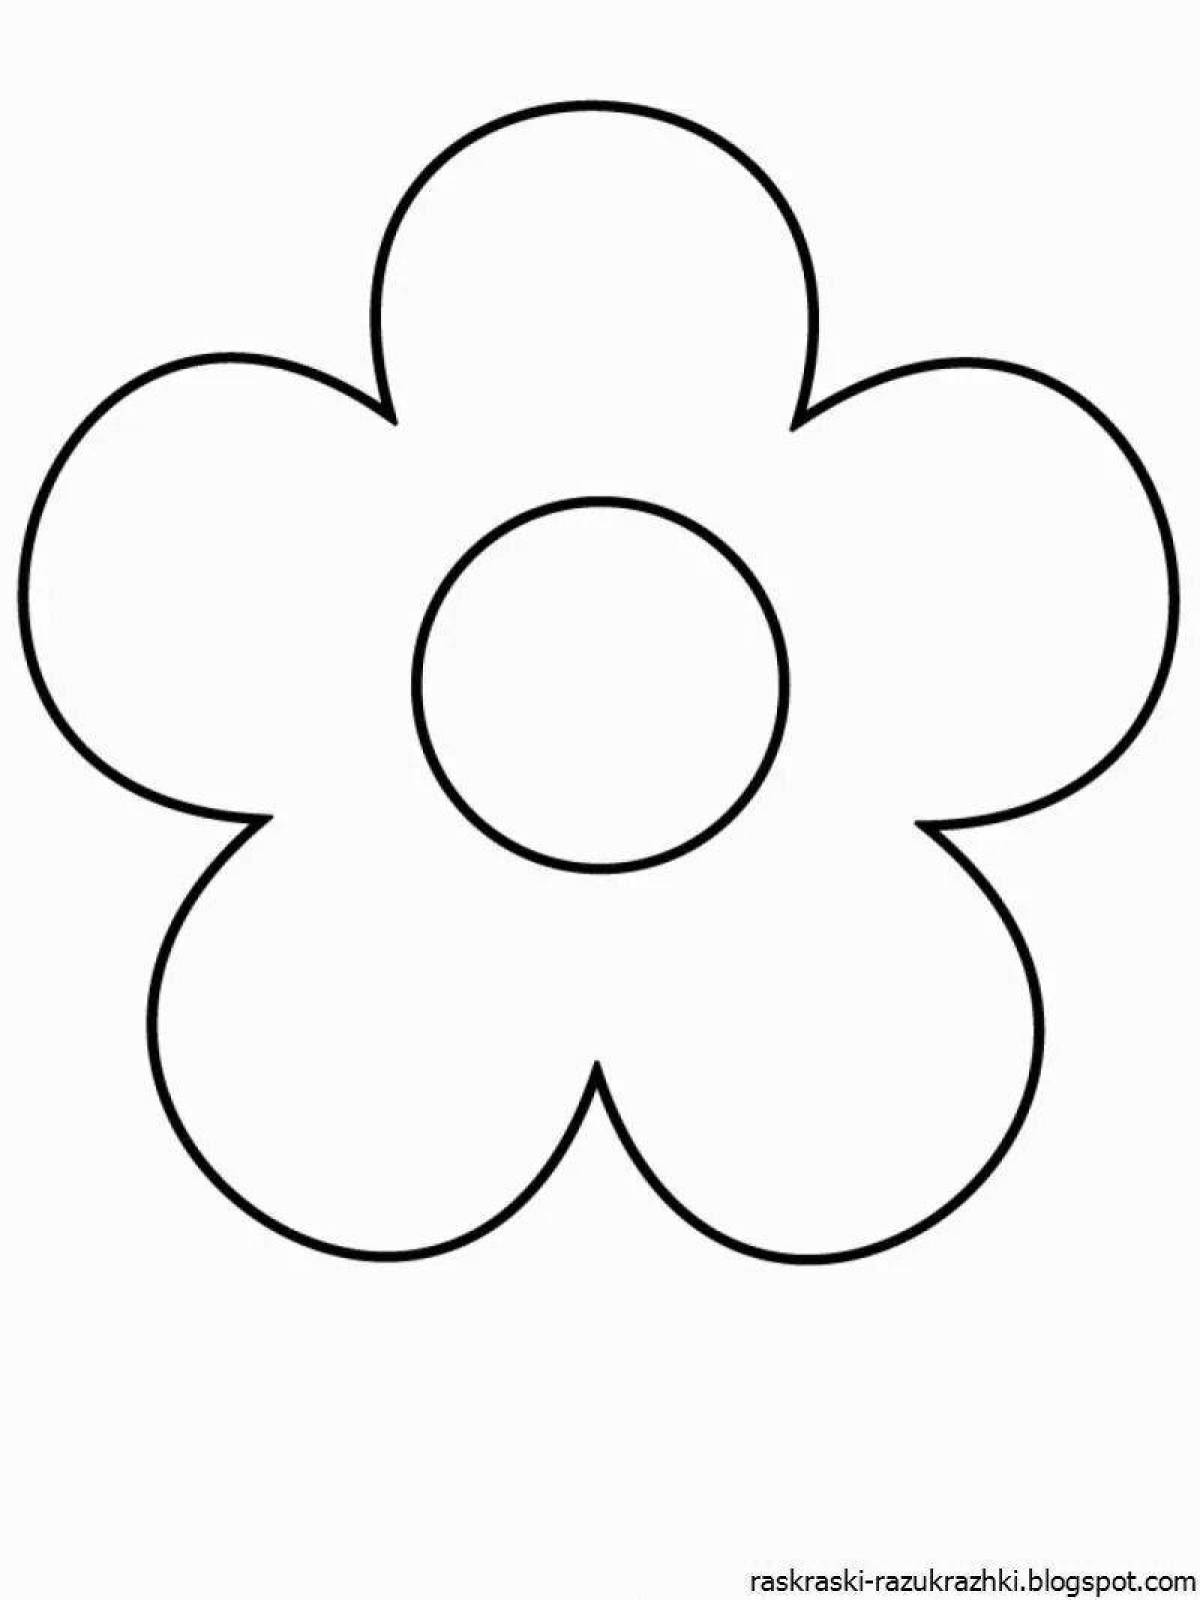 Adorable flower drawing for kids